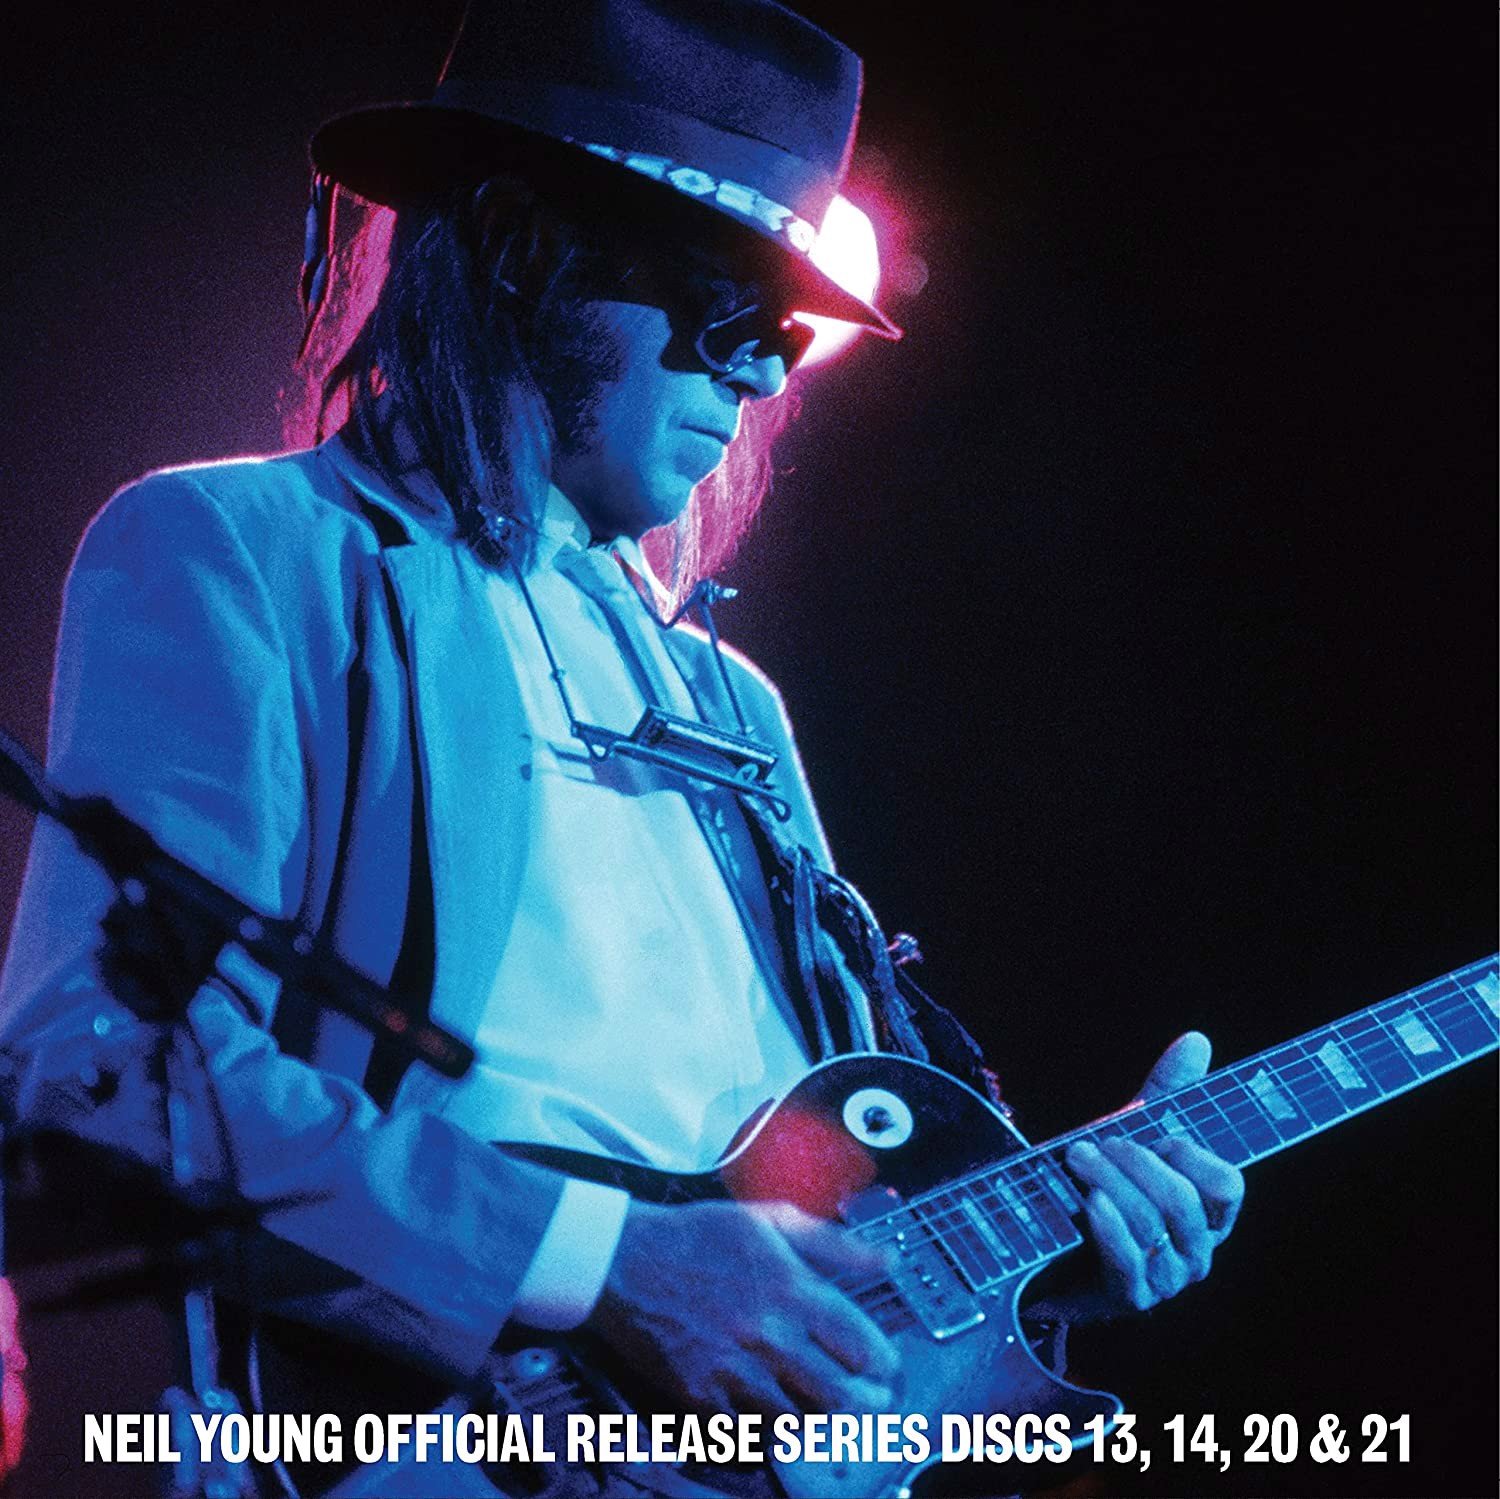 Neil Young - Official Release Series Discs 13, 14, 20 & 21 - Box set (CD)